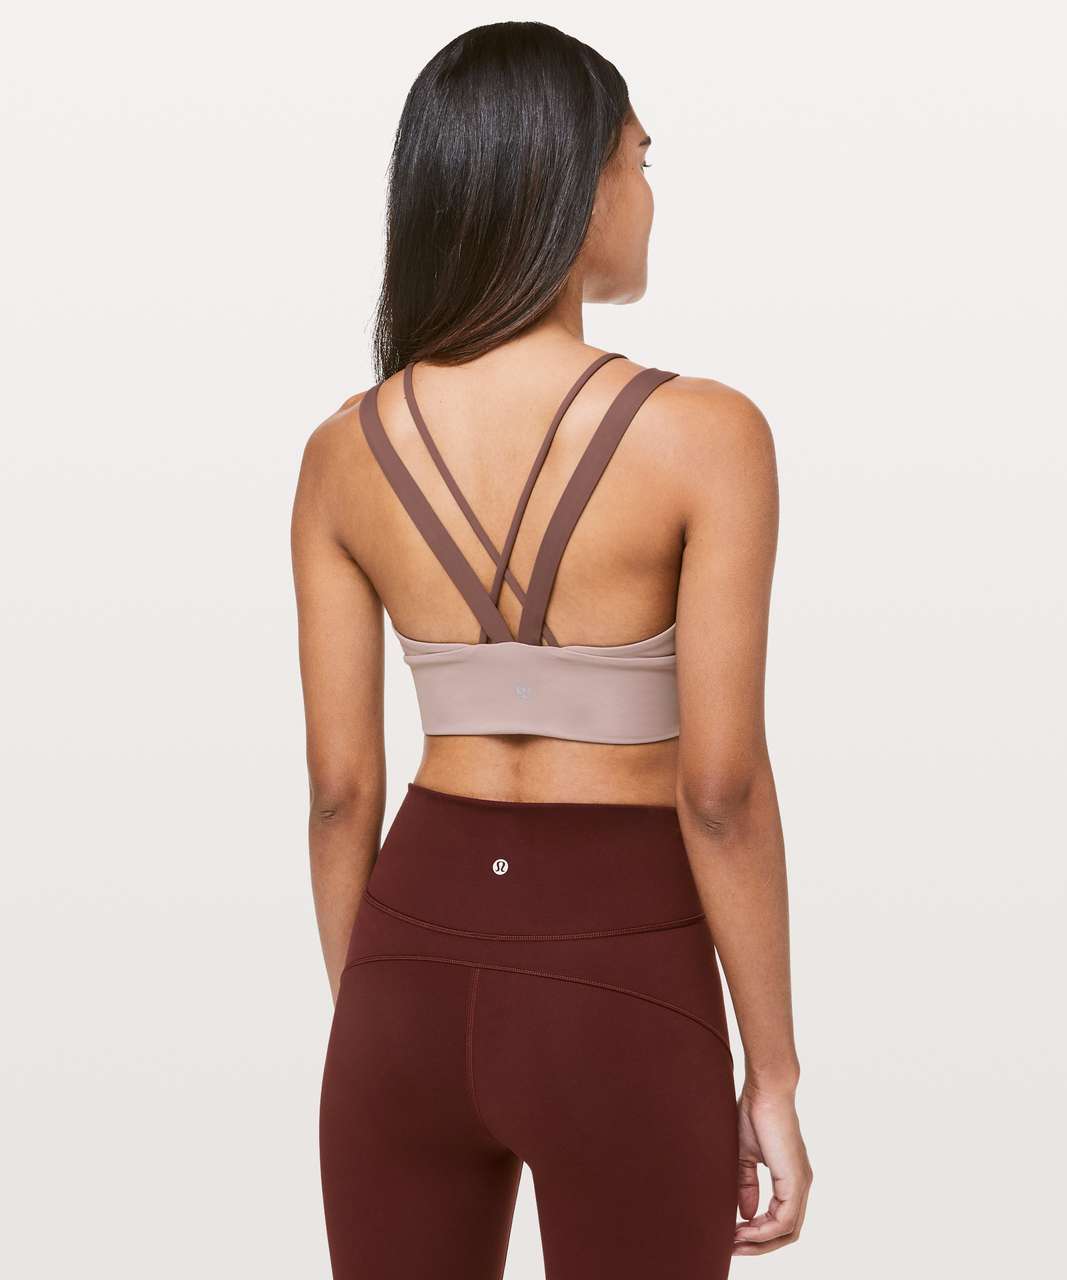 Lululemon Pushing Limits Bra *Light Support For C/D Cup - Smoky Blush / Antique Bark